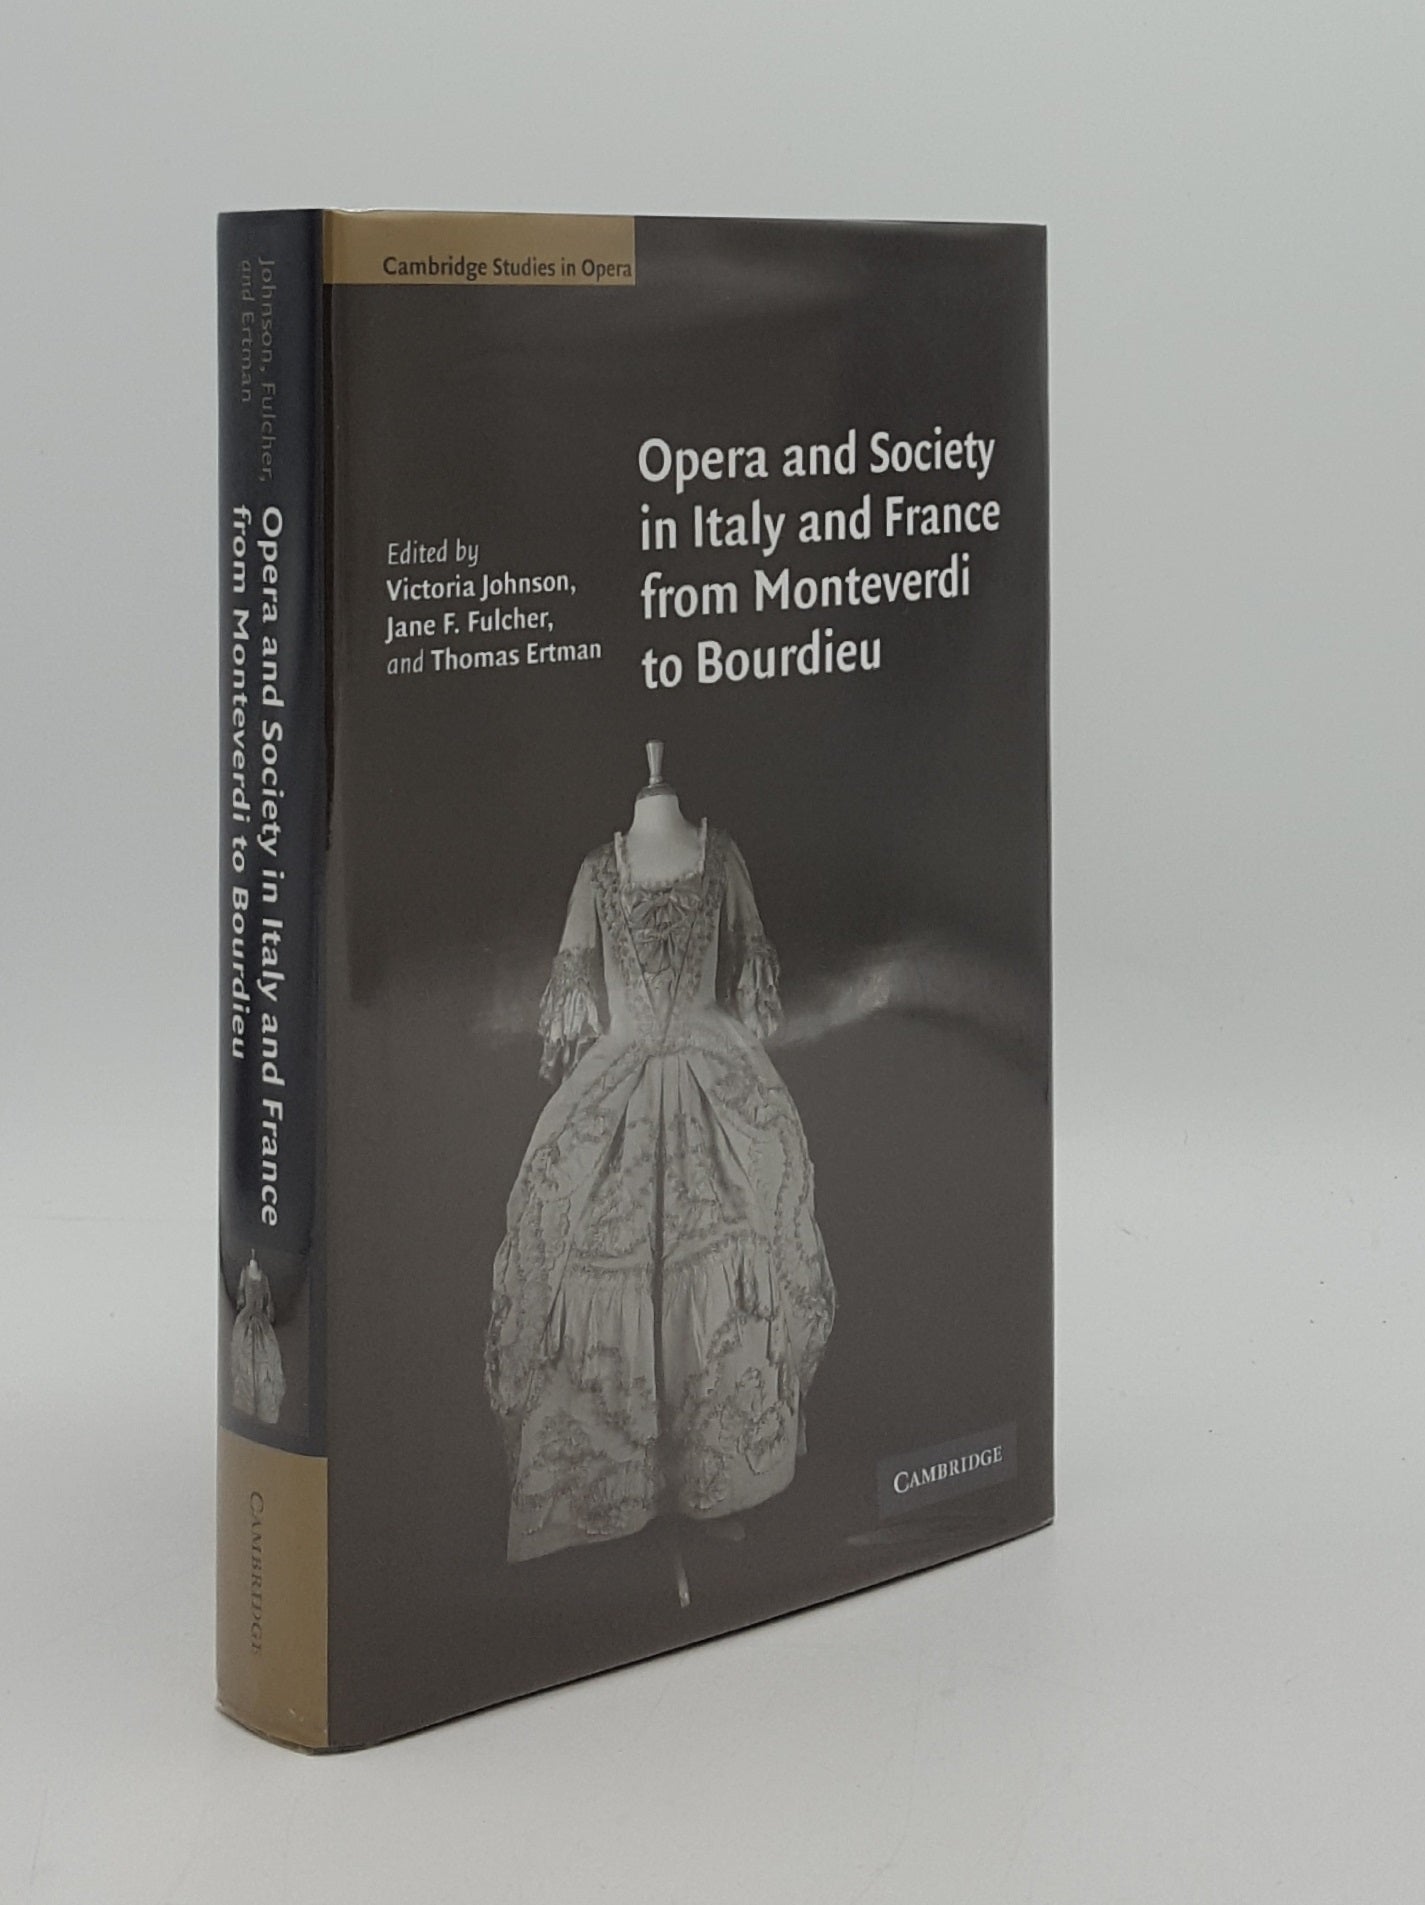 JOHNSON Victoria, FULCHER Jane F., ERTMAN Thomas - Opera and Society in Italy and France from Monteverdi to Bourdieu